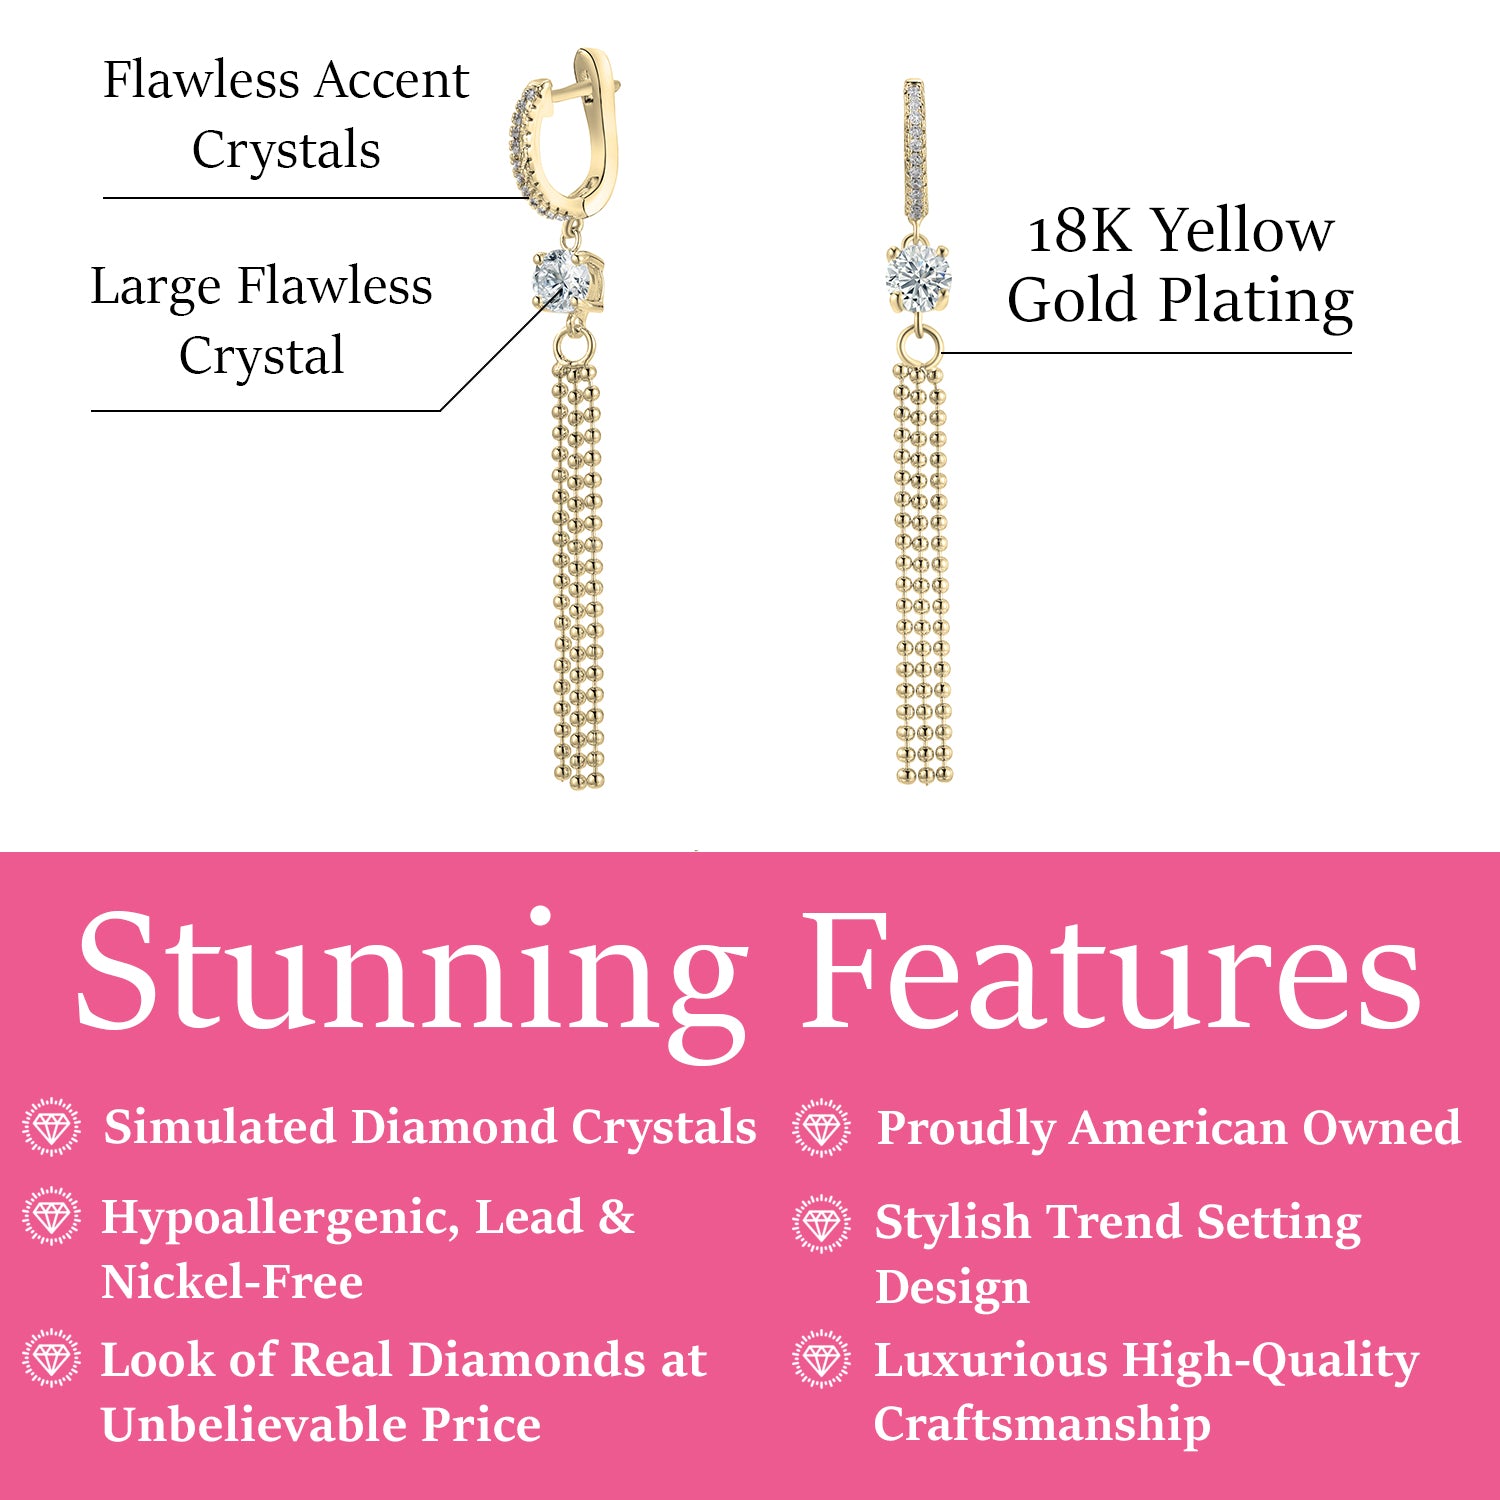 Raya 18k White Gold Plated Silver Dangle Earrings with Simulated Diamond CZ Crystals